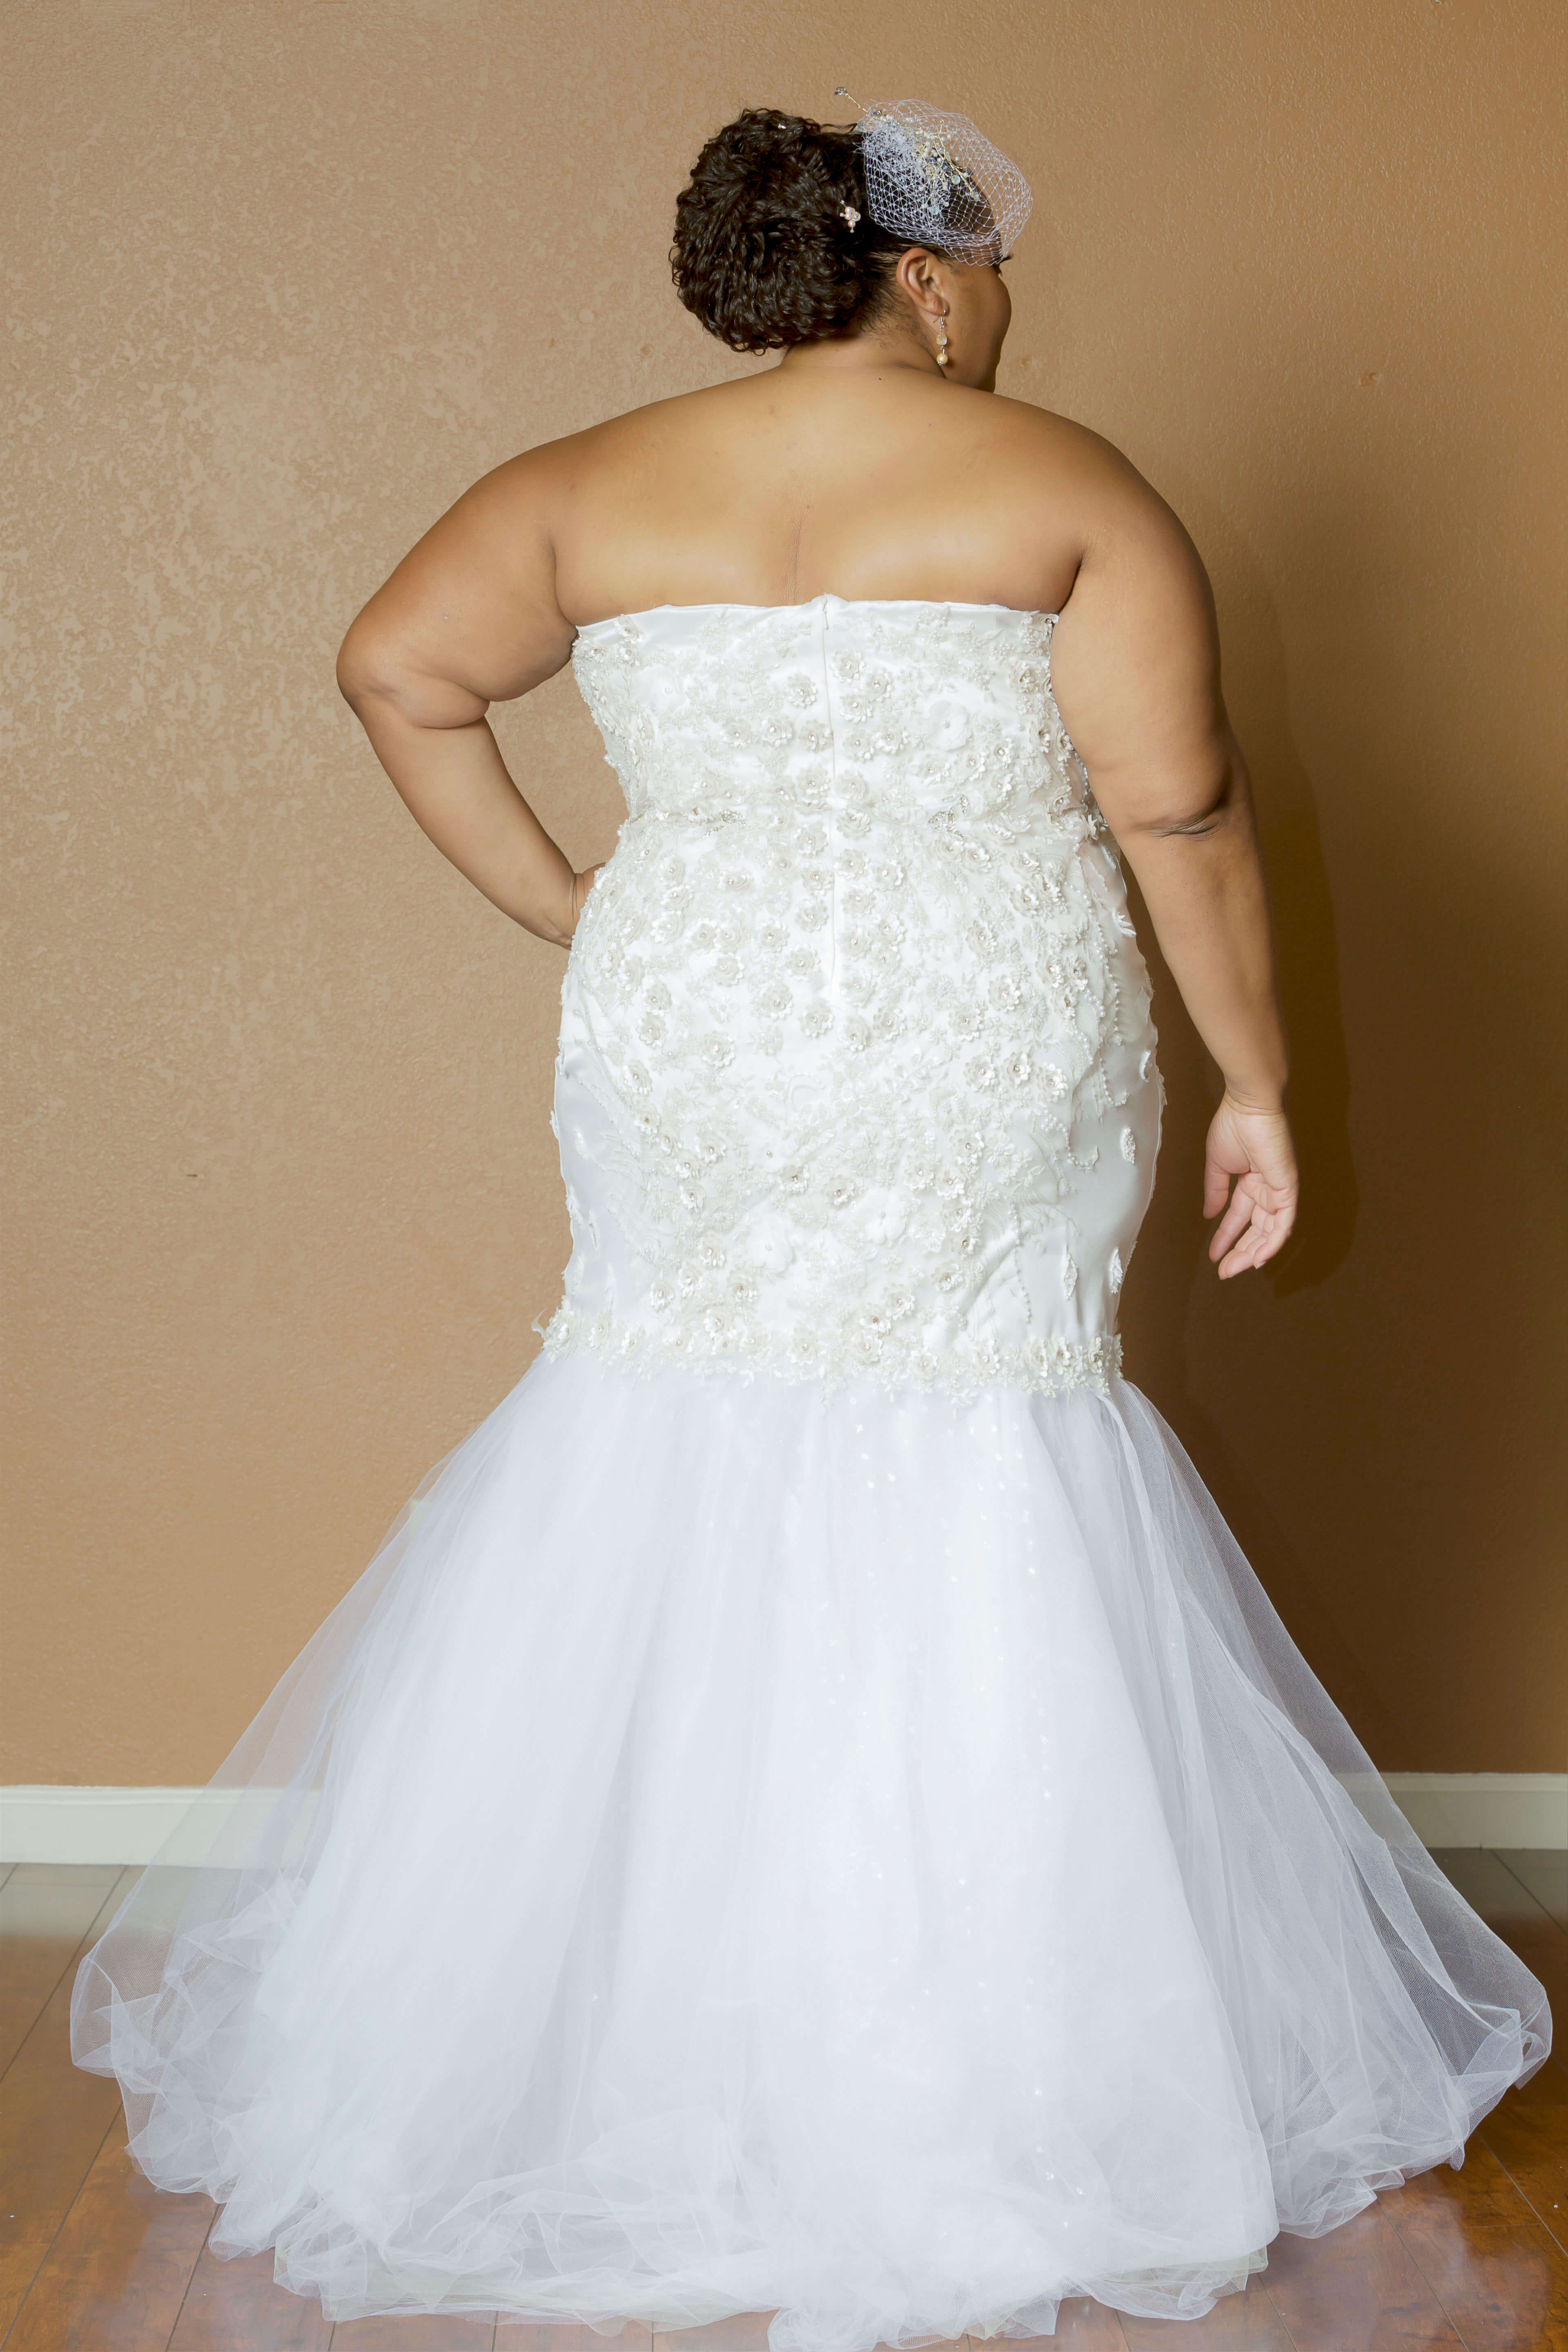 Full Figured Custom Made Wedding Gown, Built-in Corset Plus Size Dress.